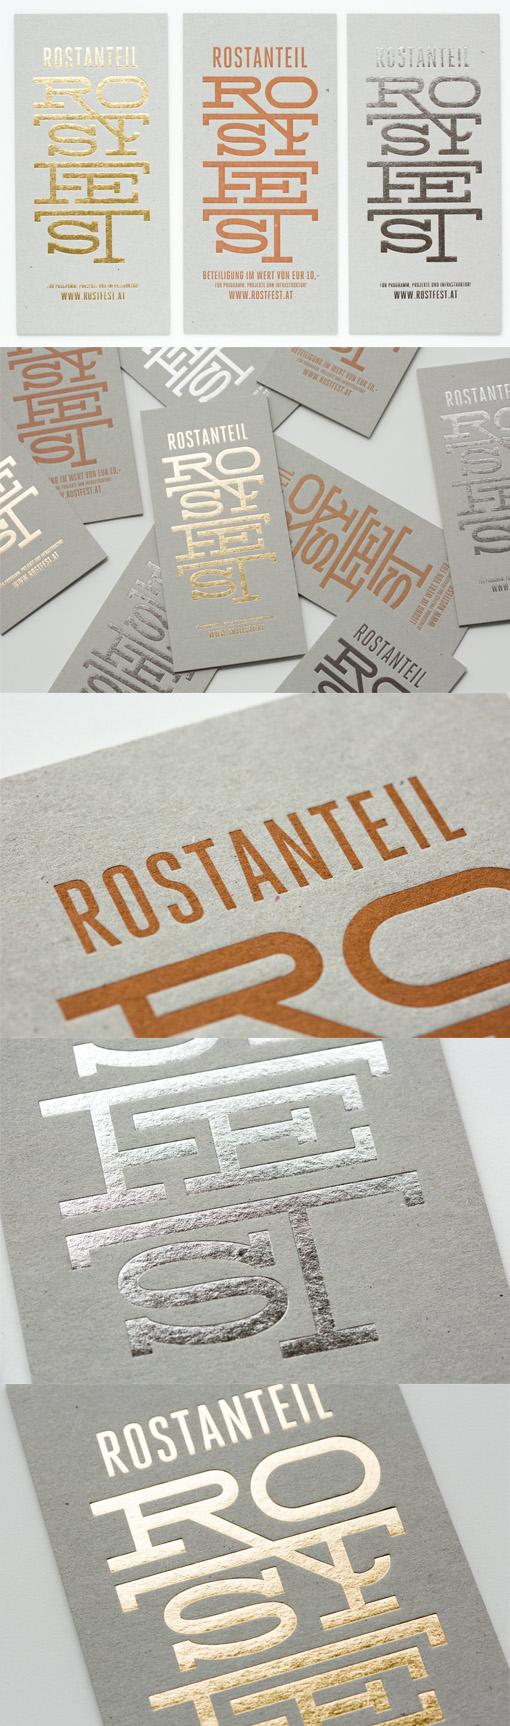 Brilliant Typography On A Hot Foil Stamped Business Card